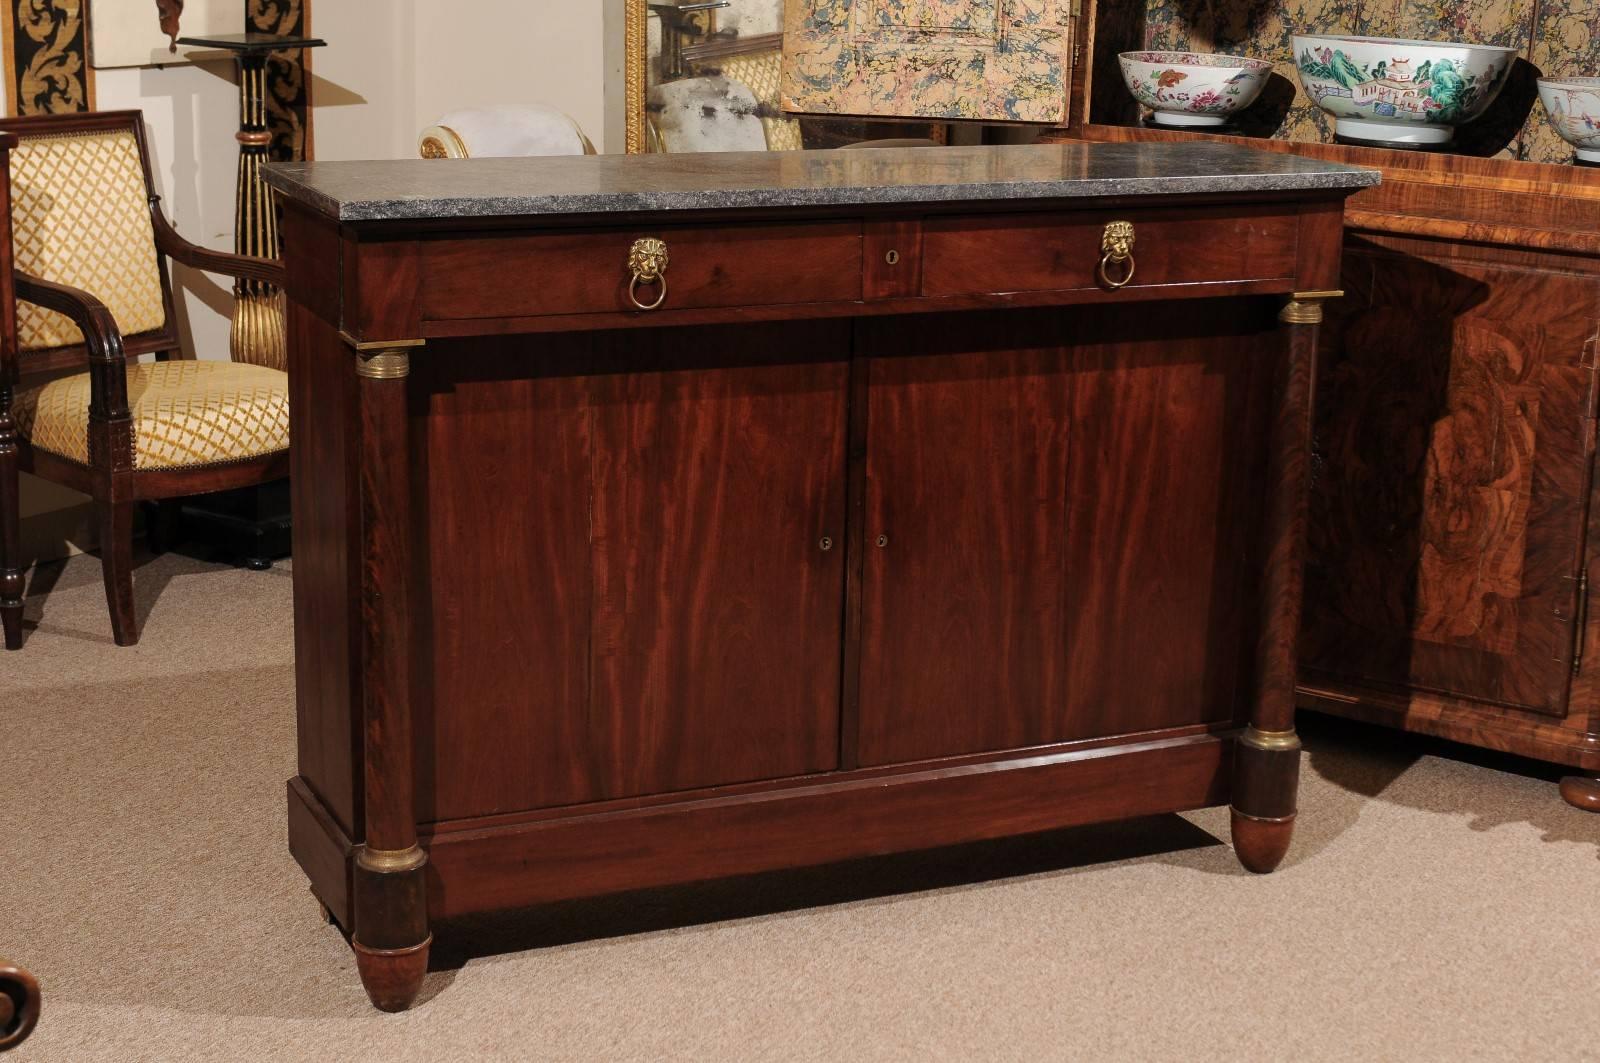 Empire mahogany buffet with two drawers above two cabinet doors, flanking columns with bronze doré mounts and grey marble top, France 19th century. Very narrow depth.